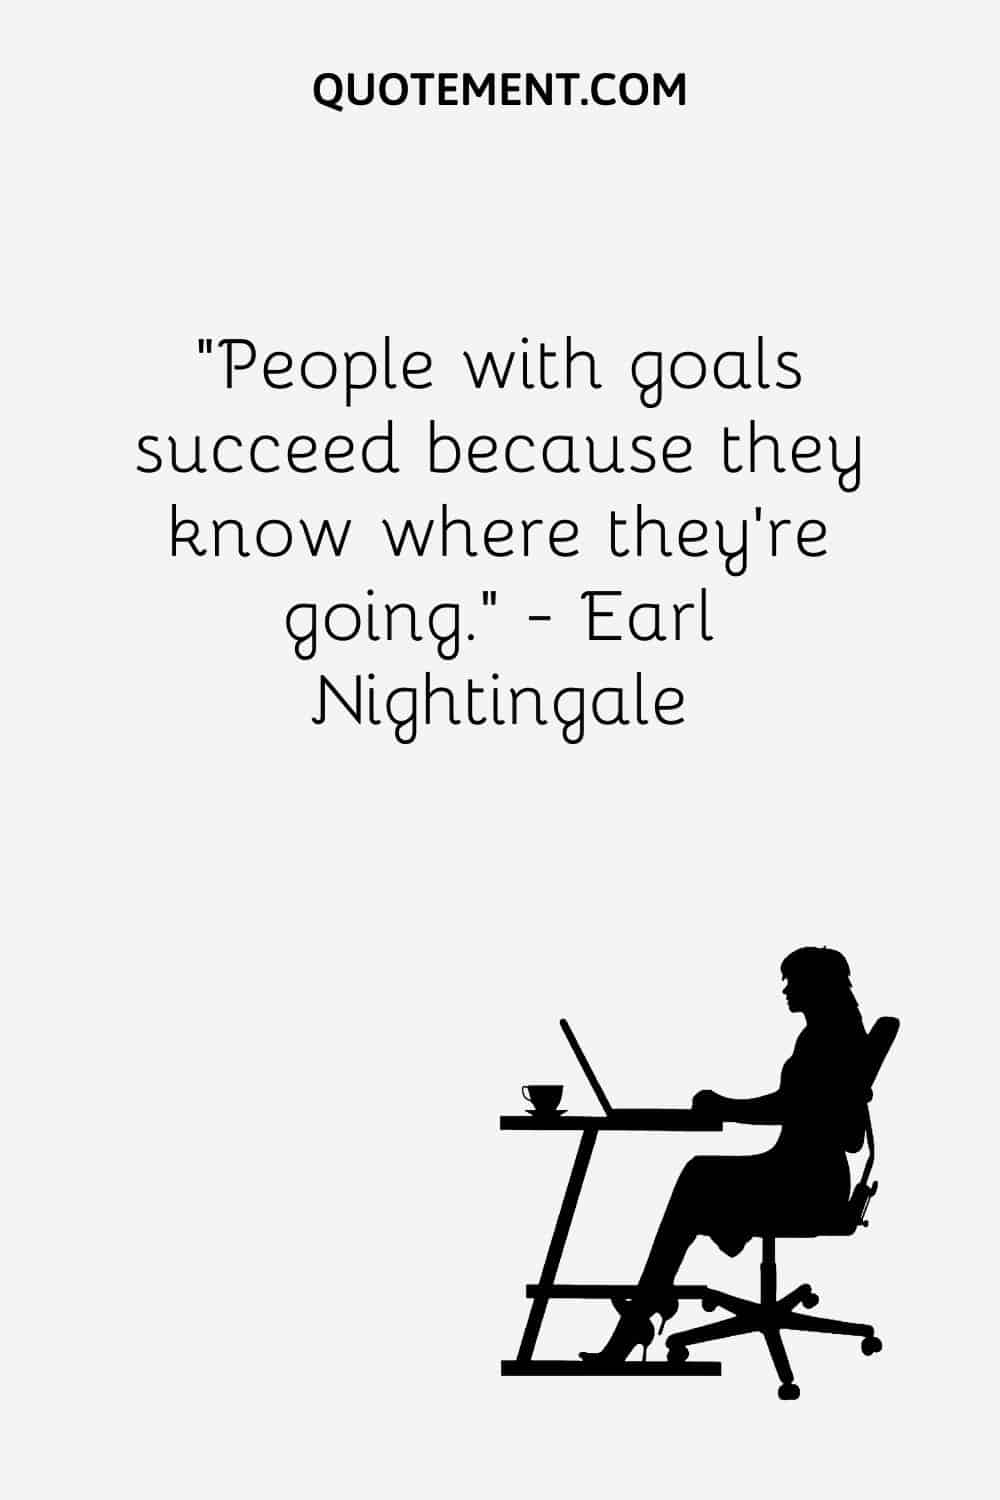 People with goals succeed because they know where they’re going